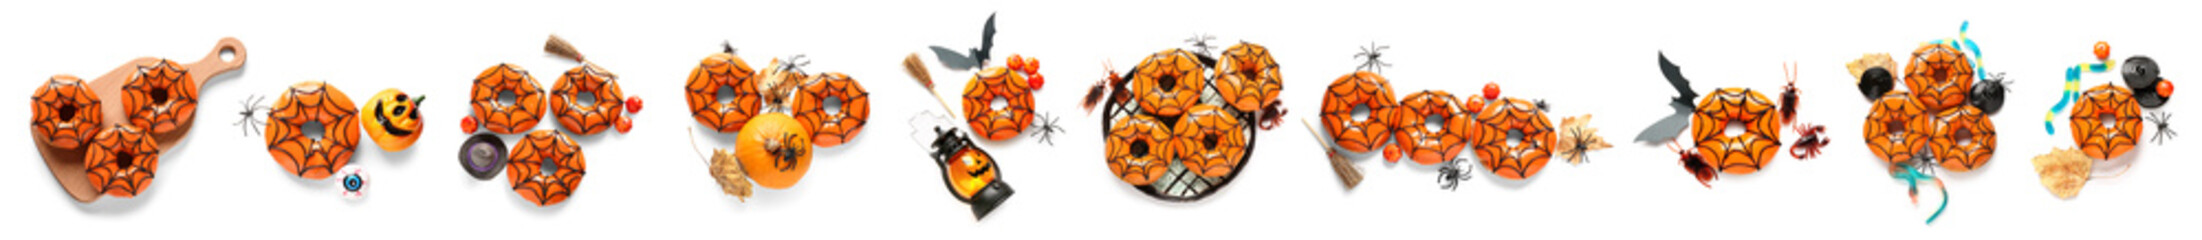 Set of tasty Halloween donuts, sweets and decor on white background, top view